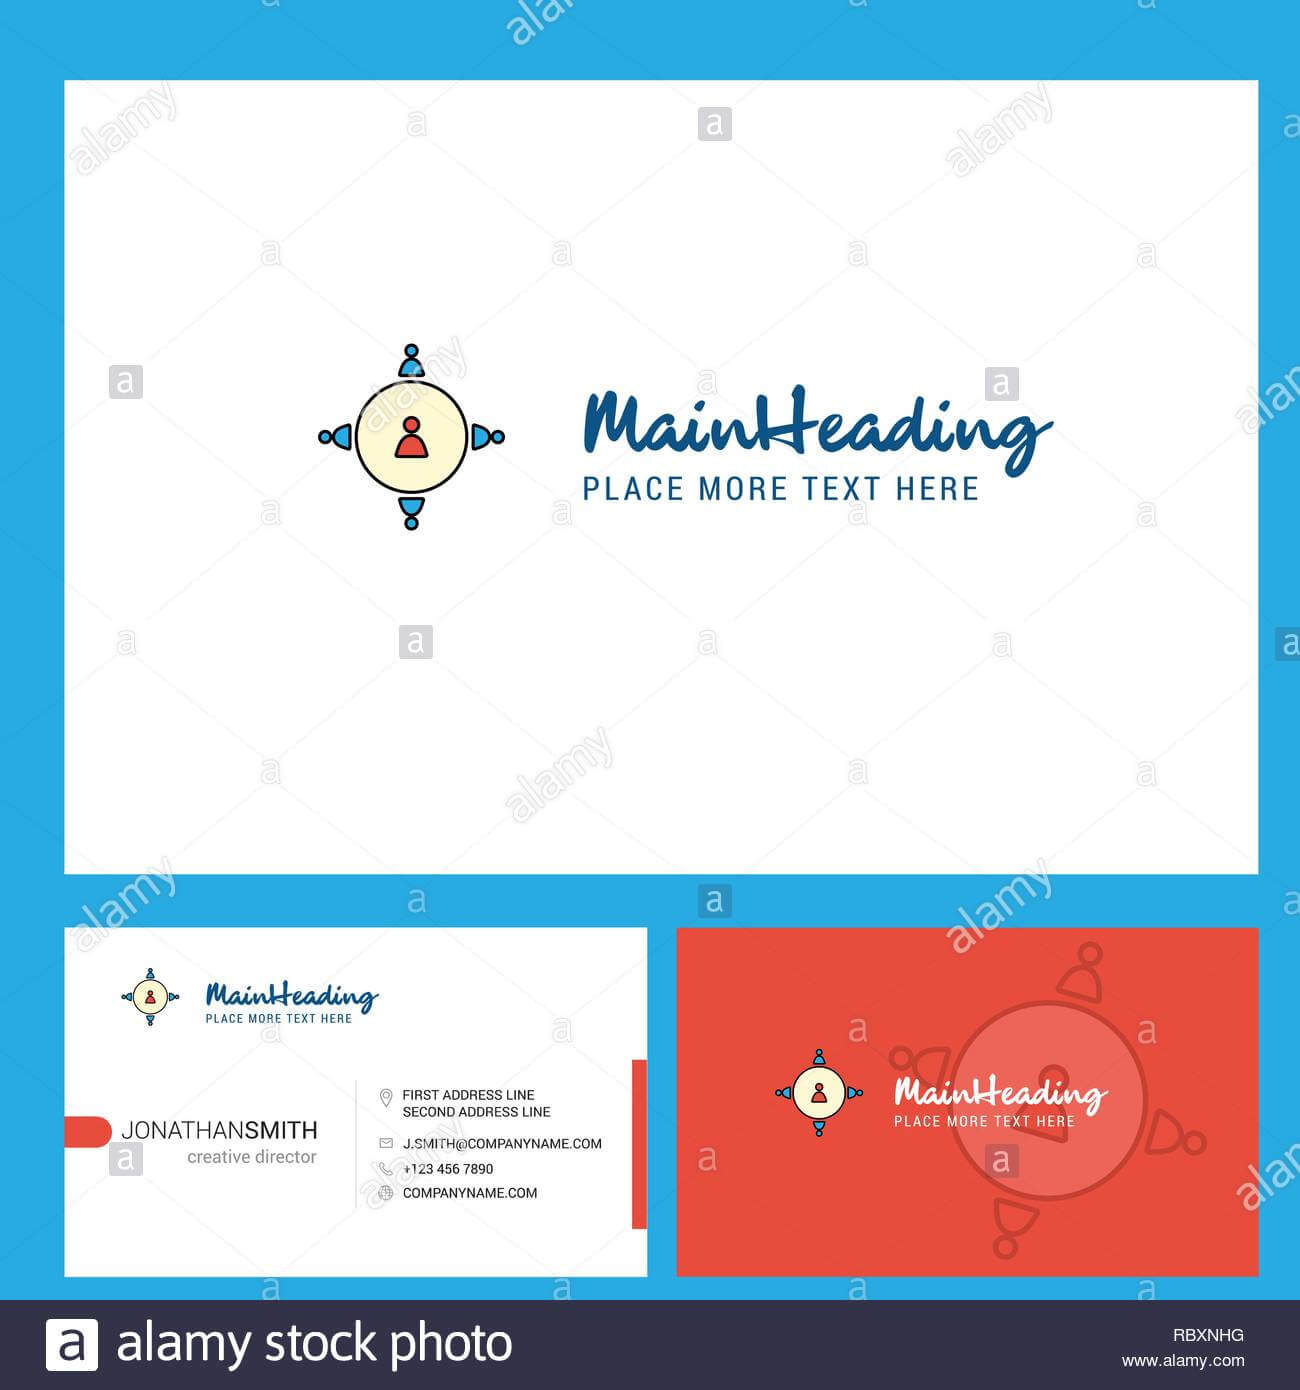 Networking Logo Design With Tagline & Front And Back With Regard To Networking Card Template